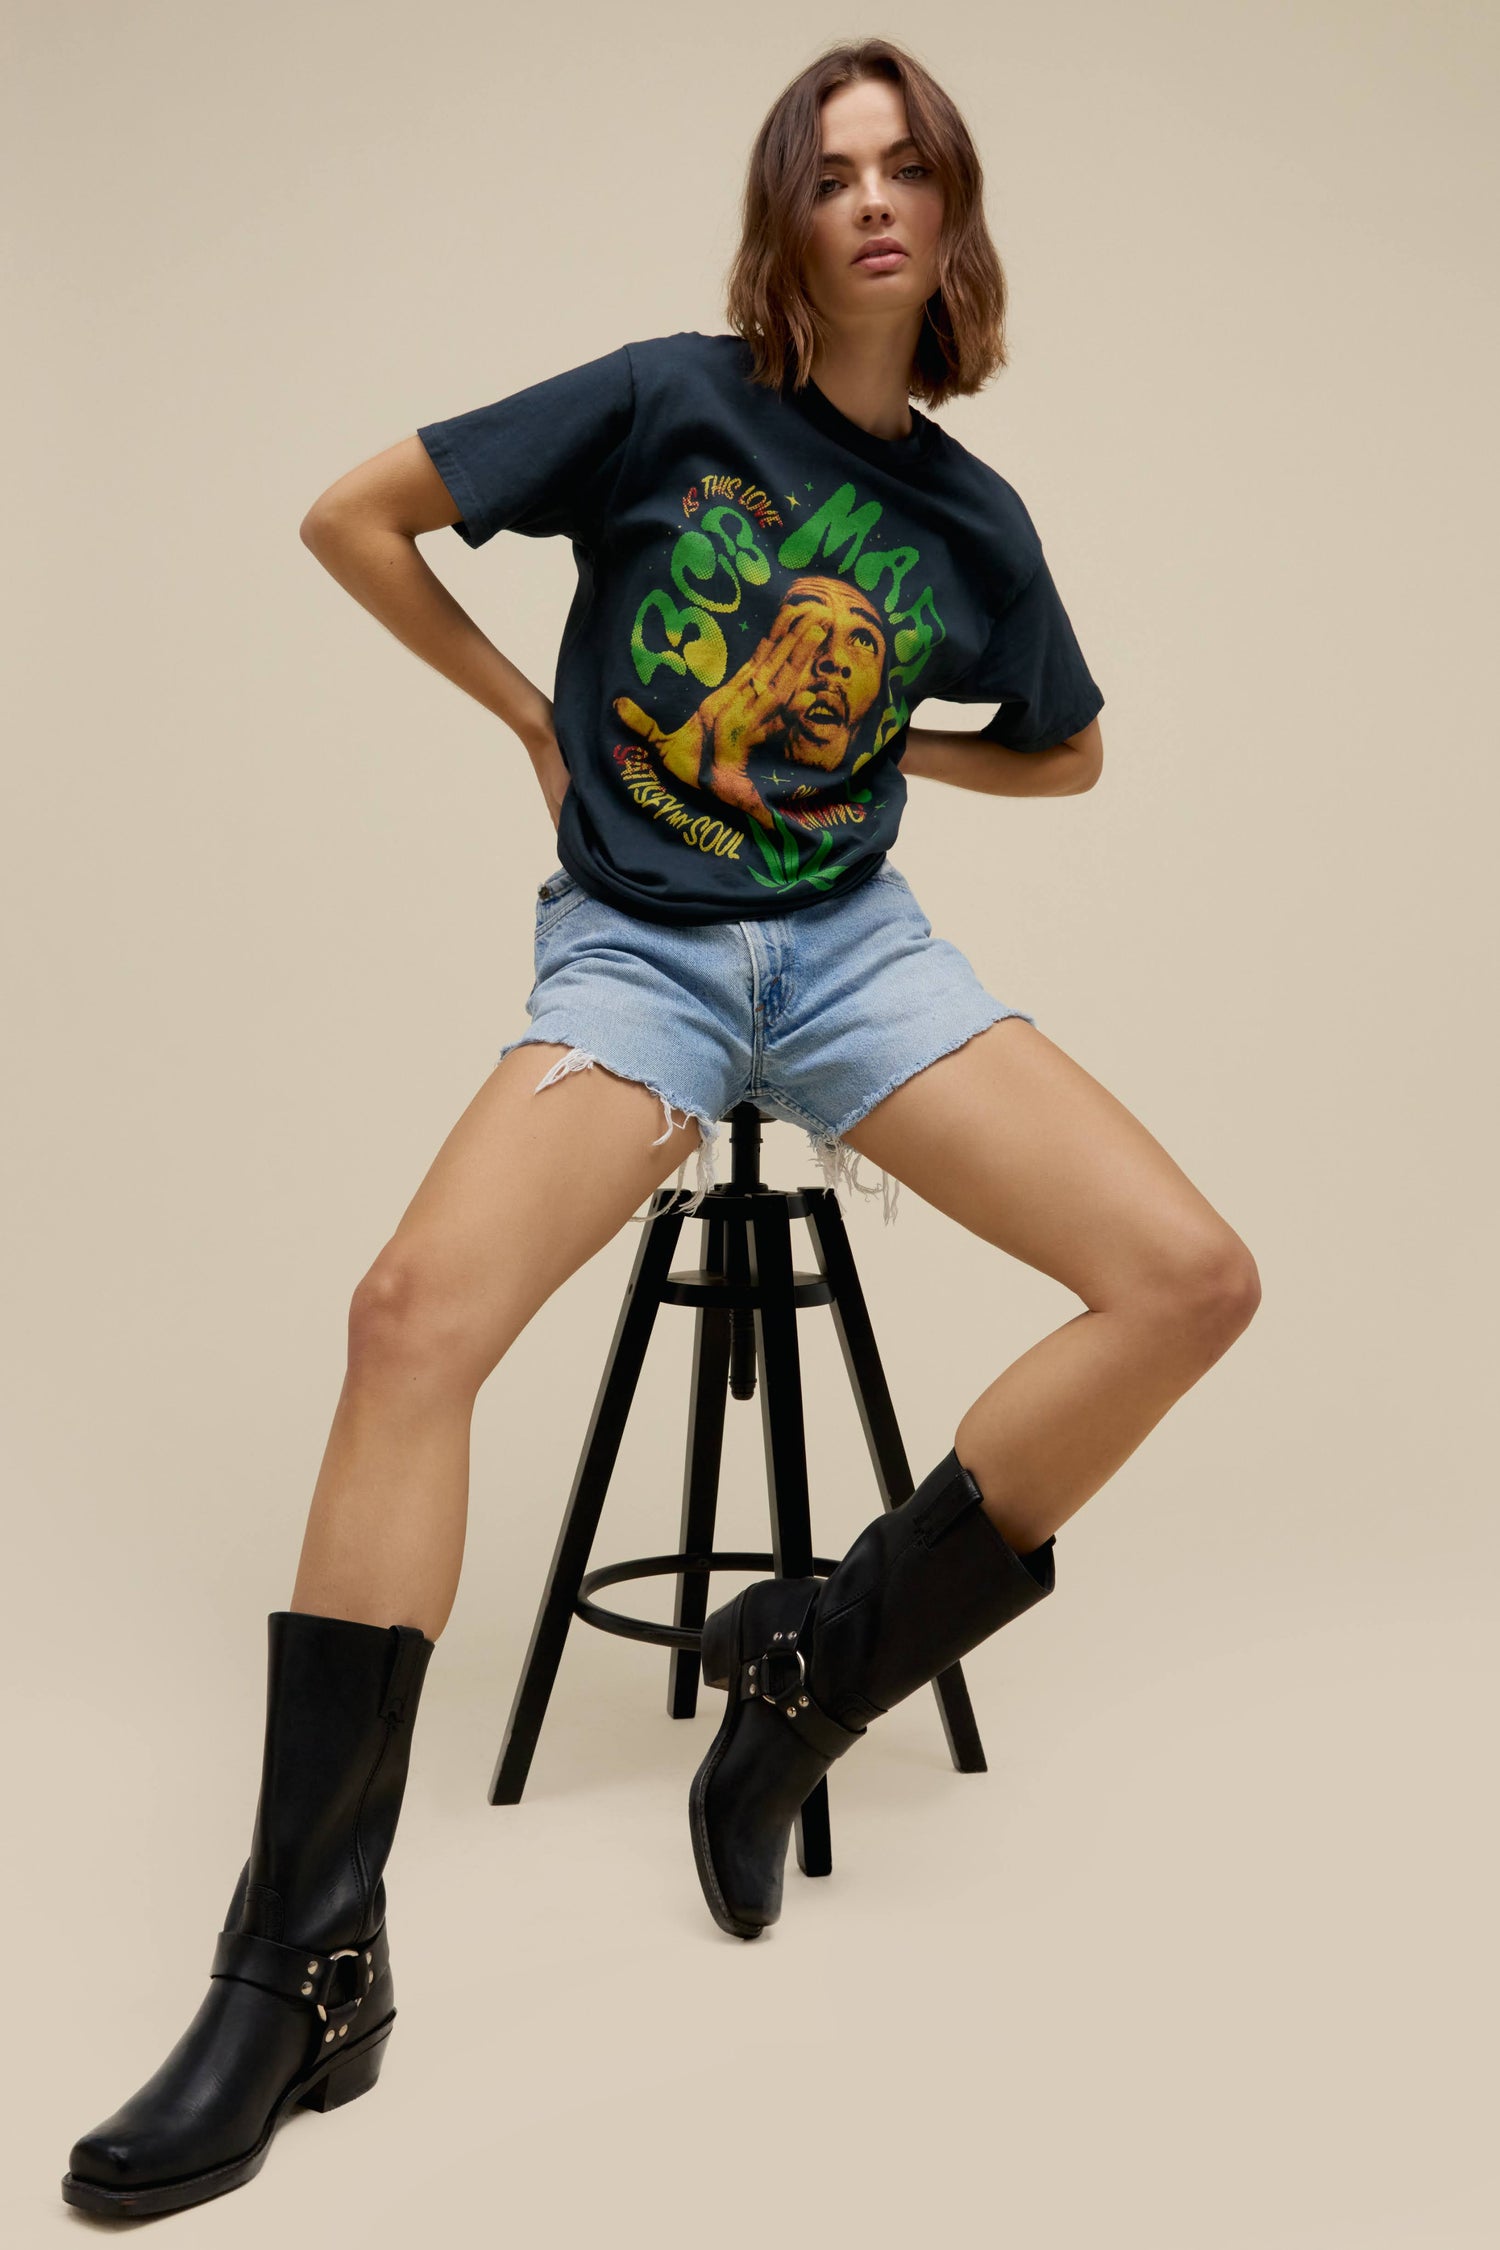 Short-haired model wearing a Bob Marley tee in vintage black featuring graphics of his hit song titles